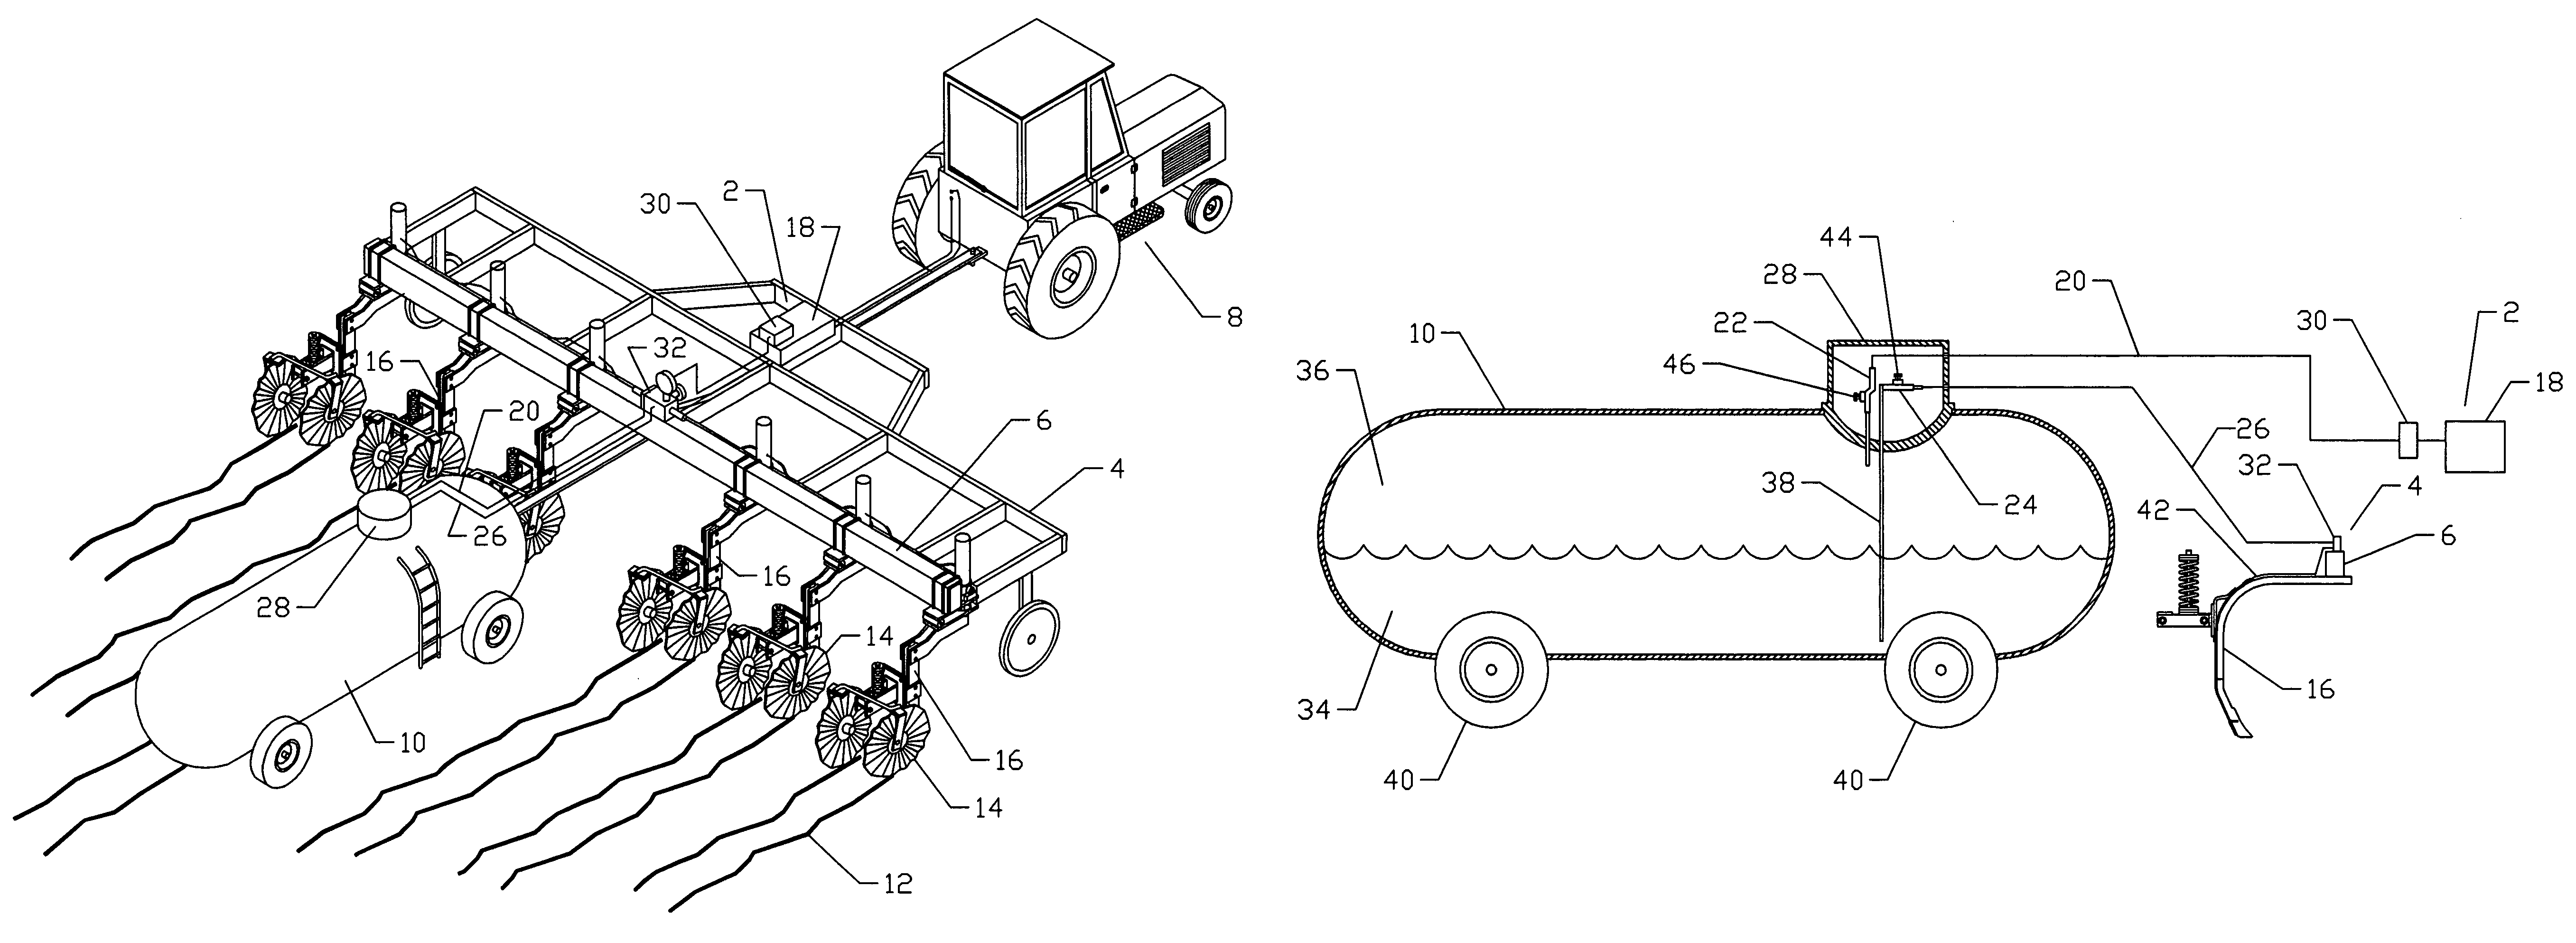 Apparatus and method to improve field application of anhydrous ammonia in cold temperatures